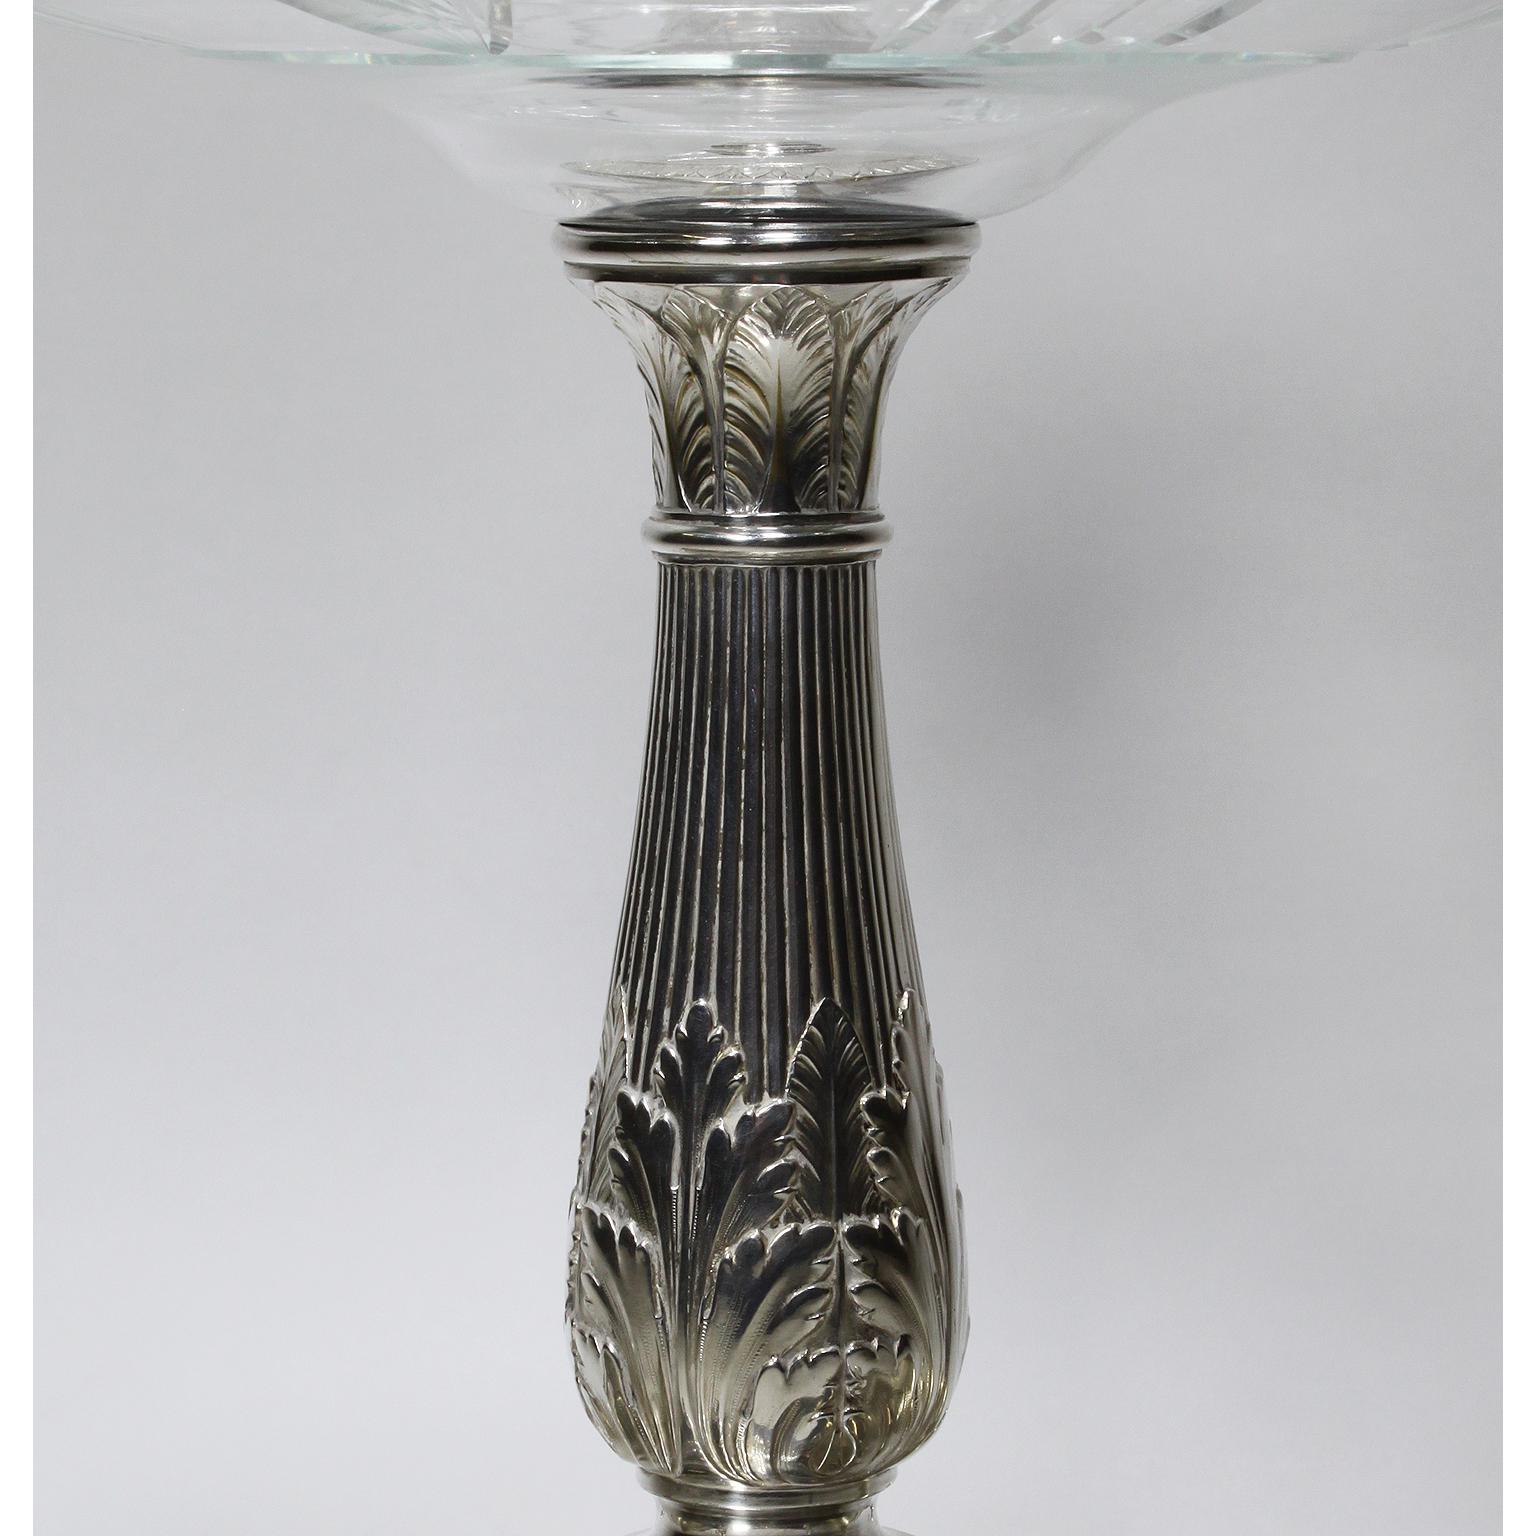 Etched Manner of Christofle 19th-20th Century Silver-Plated & Crystal Fruit Centerpiece For Sale